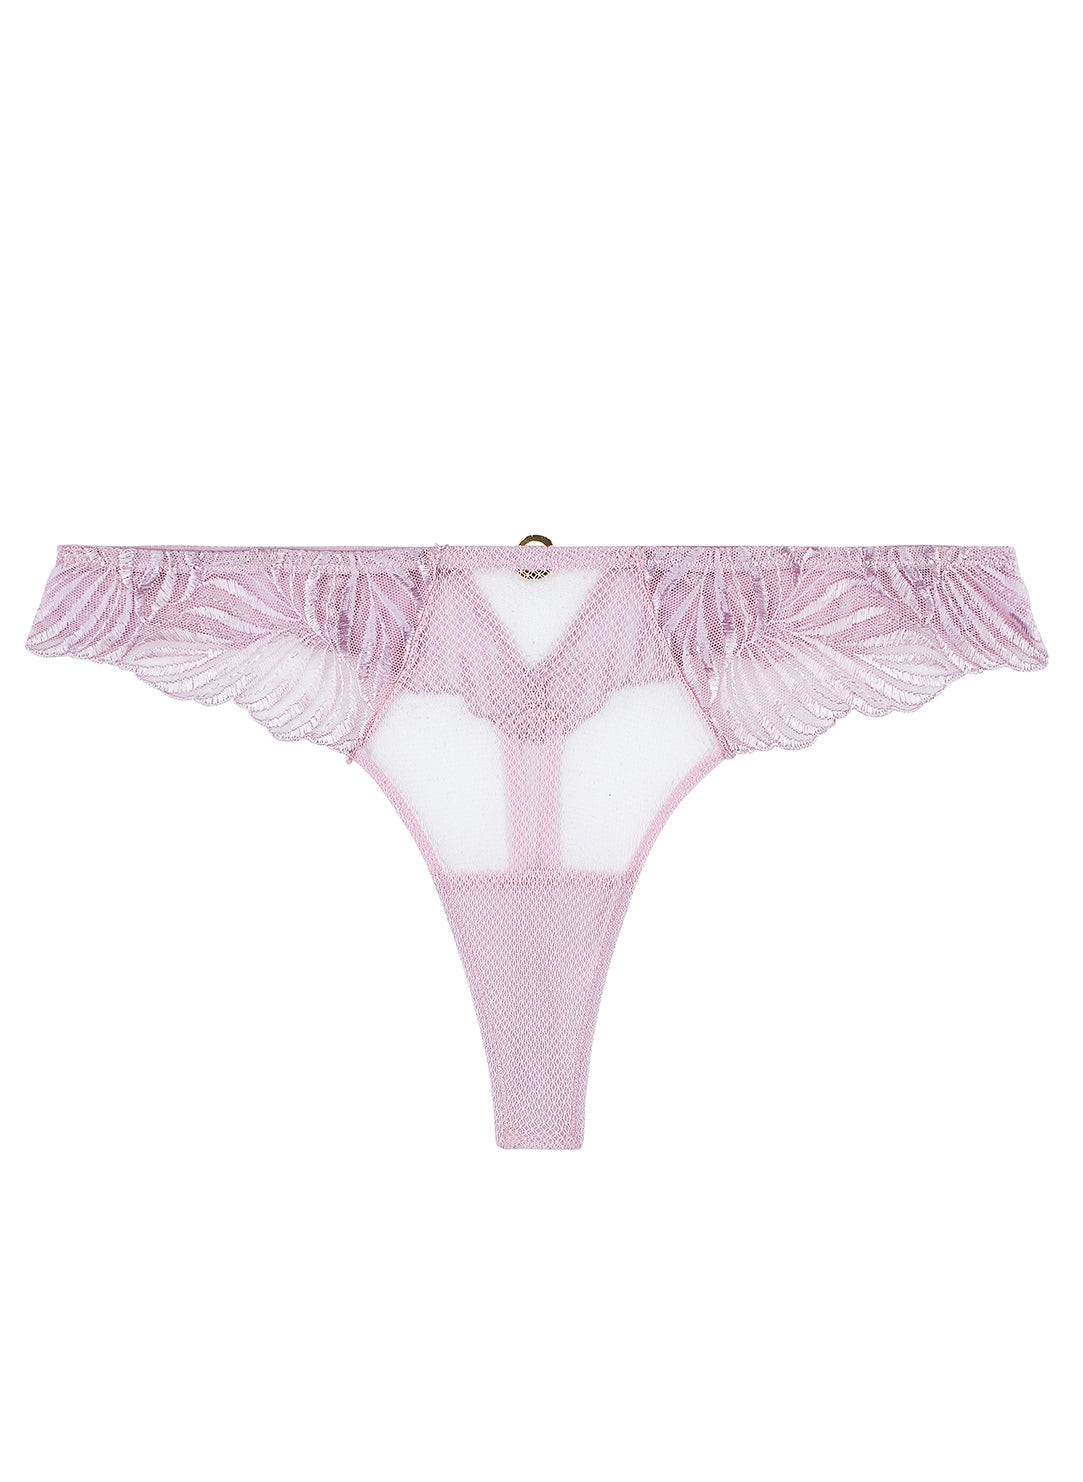 Aubade Paradis Exotique Thong in Lavender